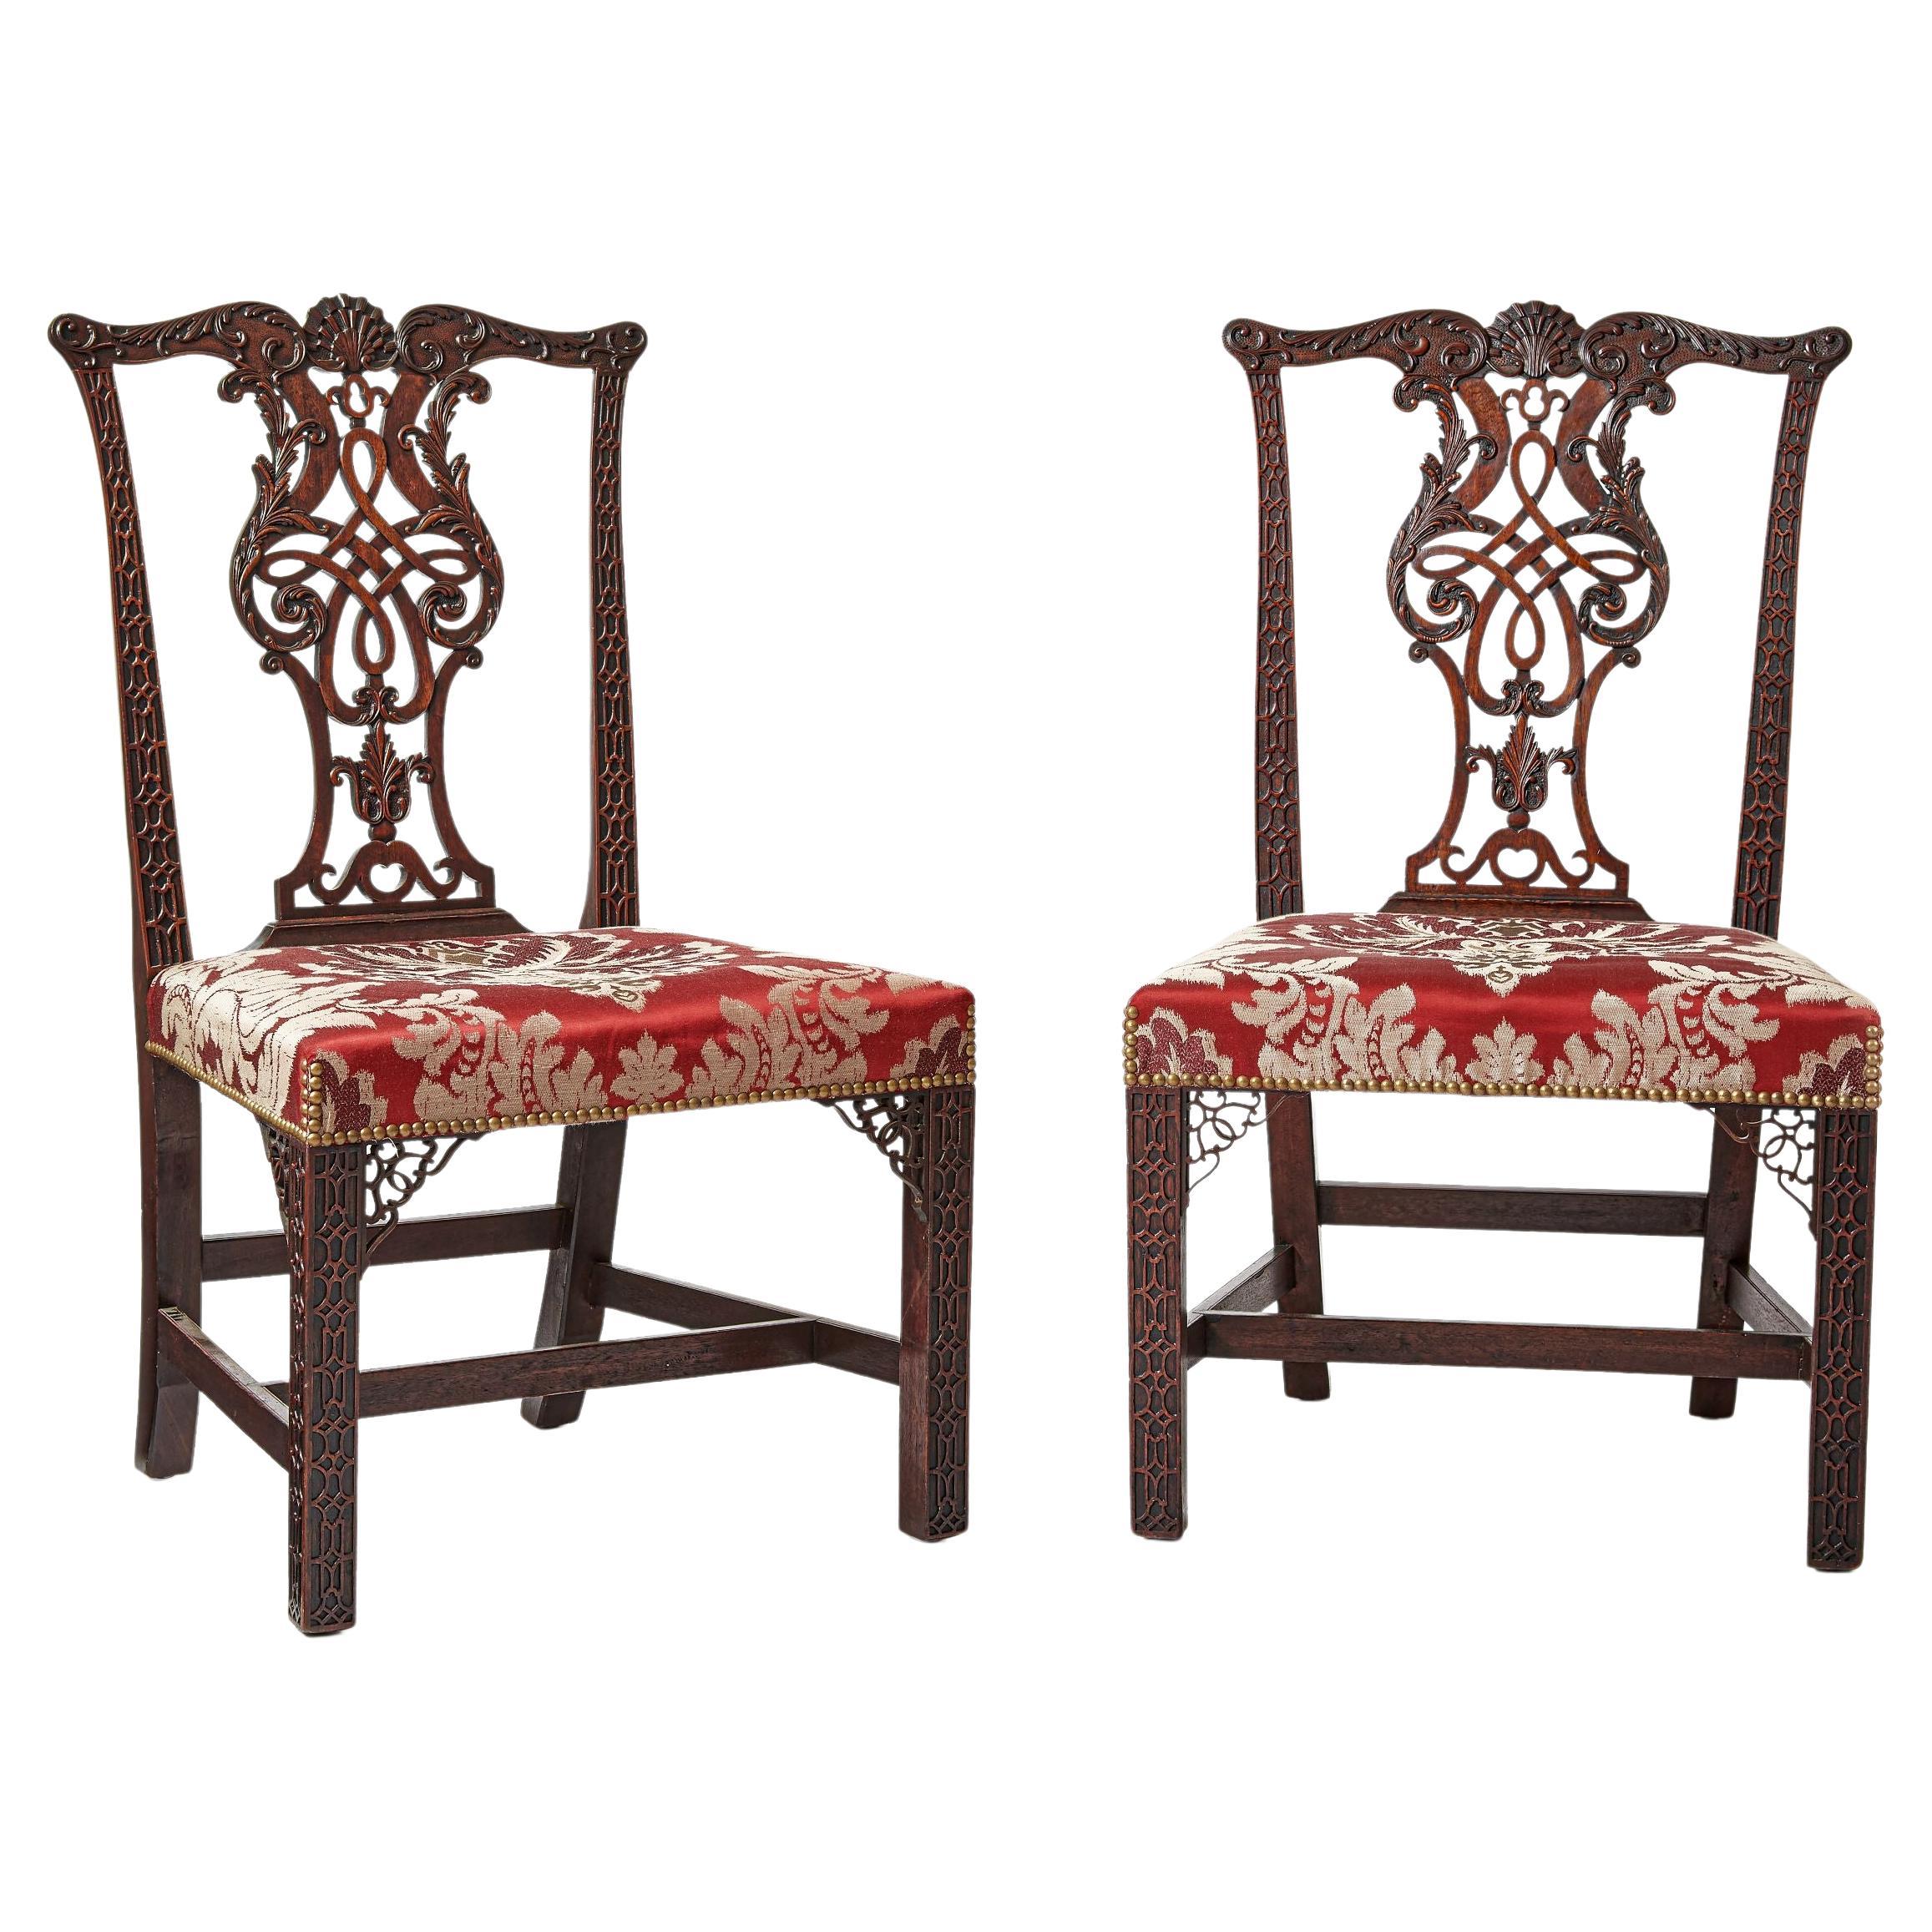 Matched Pair of Superb Mahogany Chippendale Sidechairs